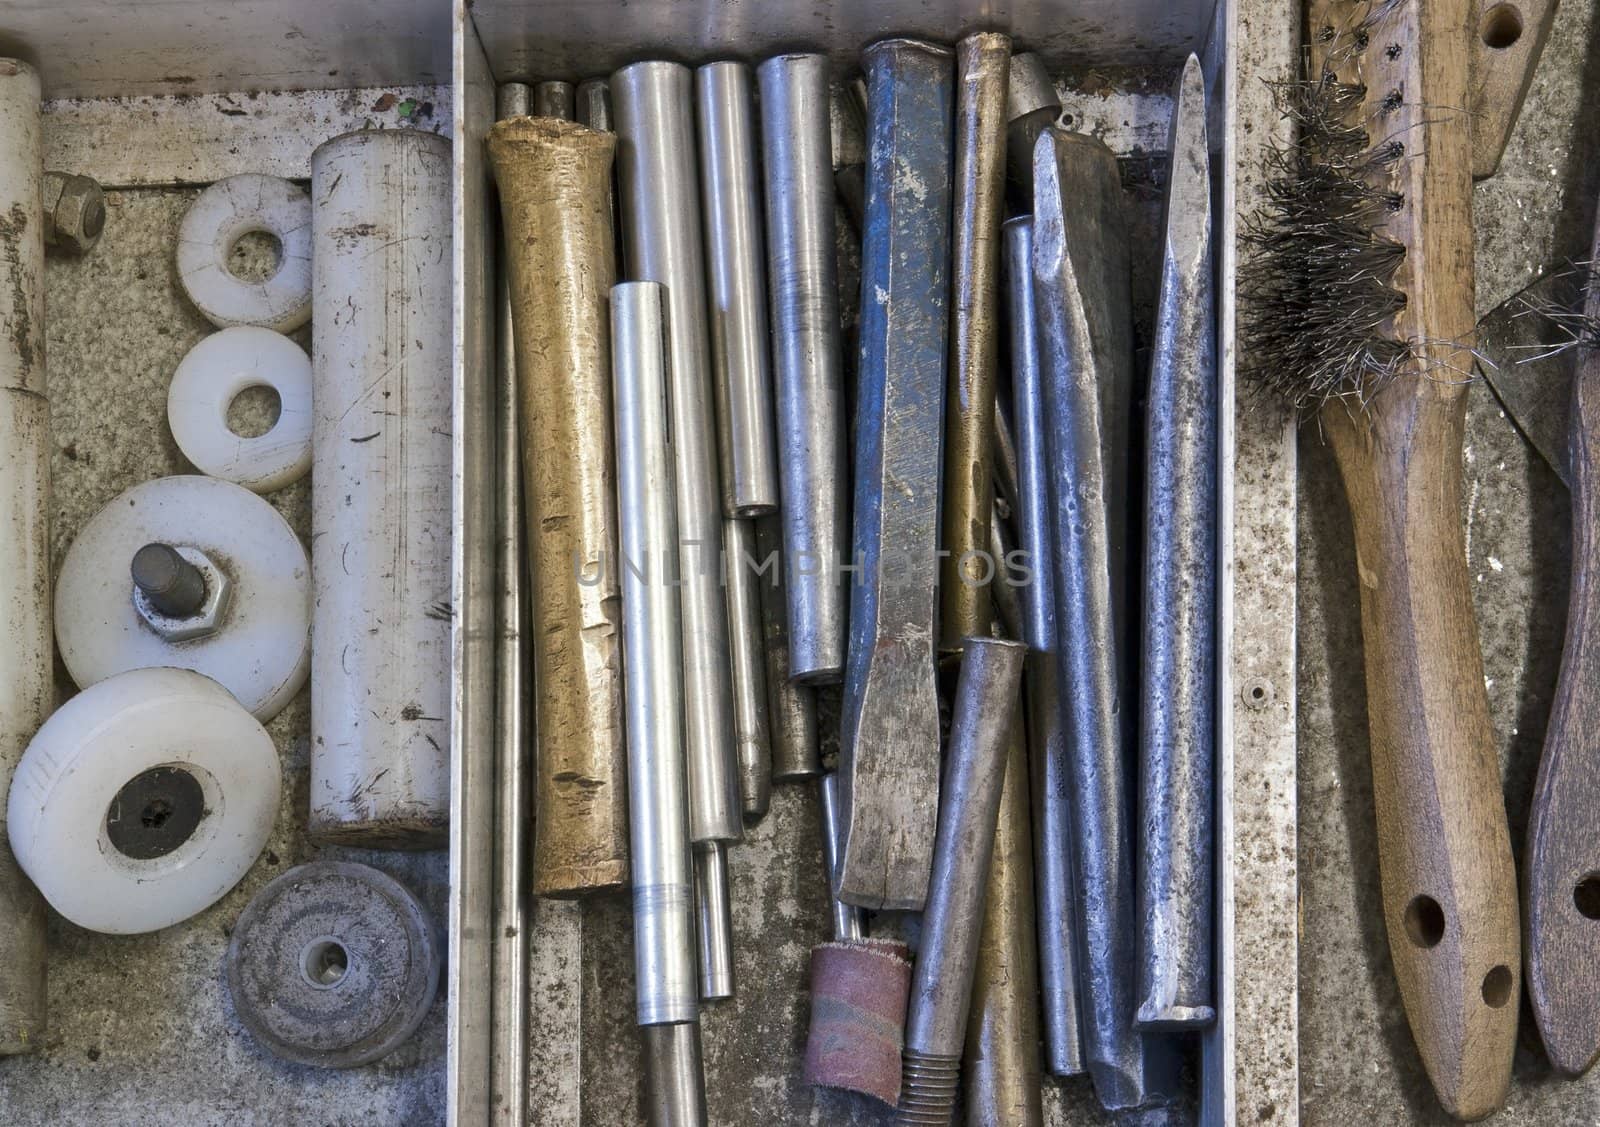 tools in drawer - chisel, punch, steel brush by gewoldi